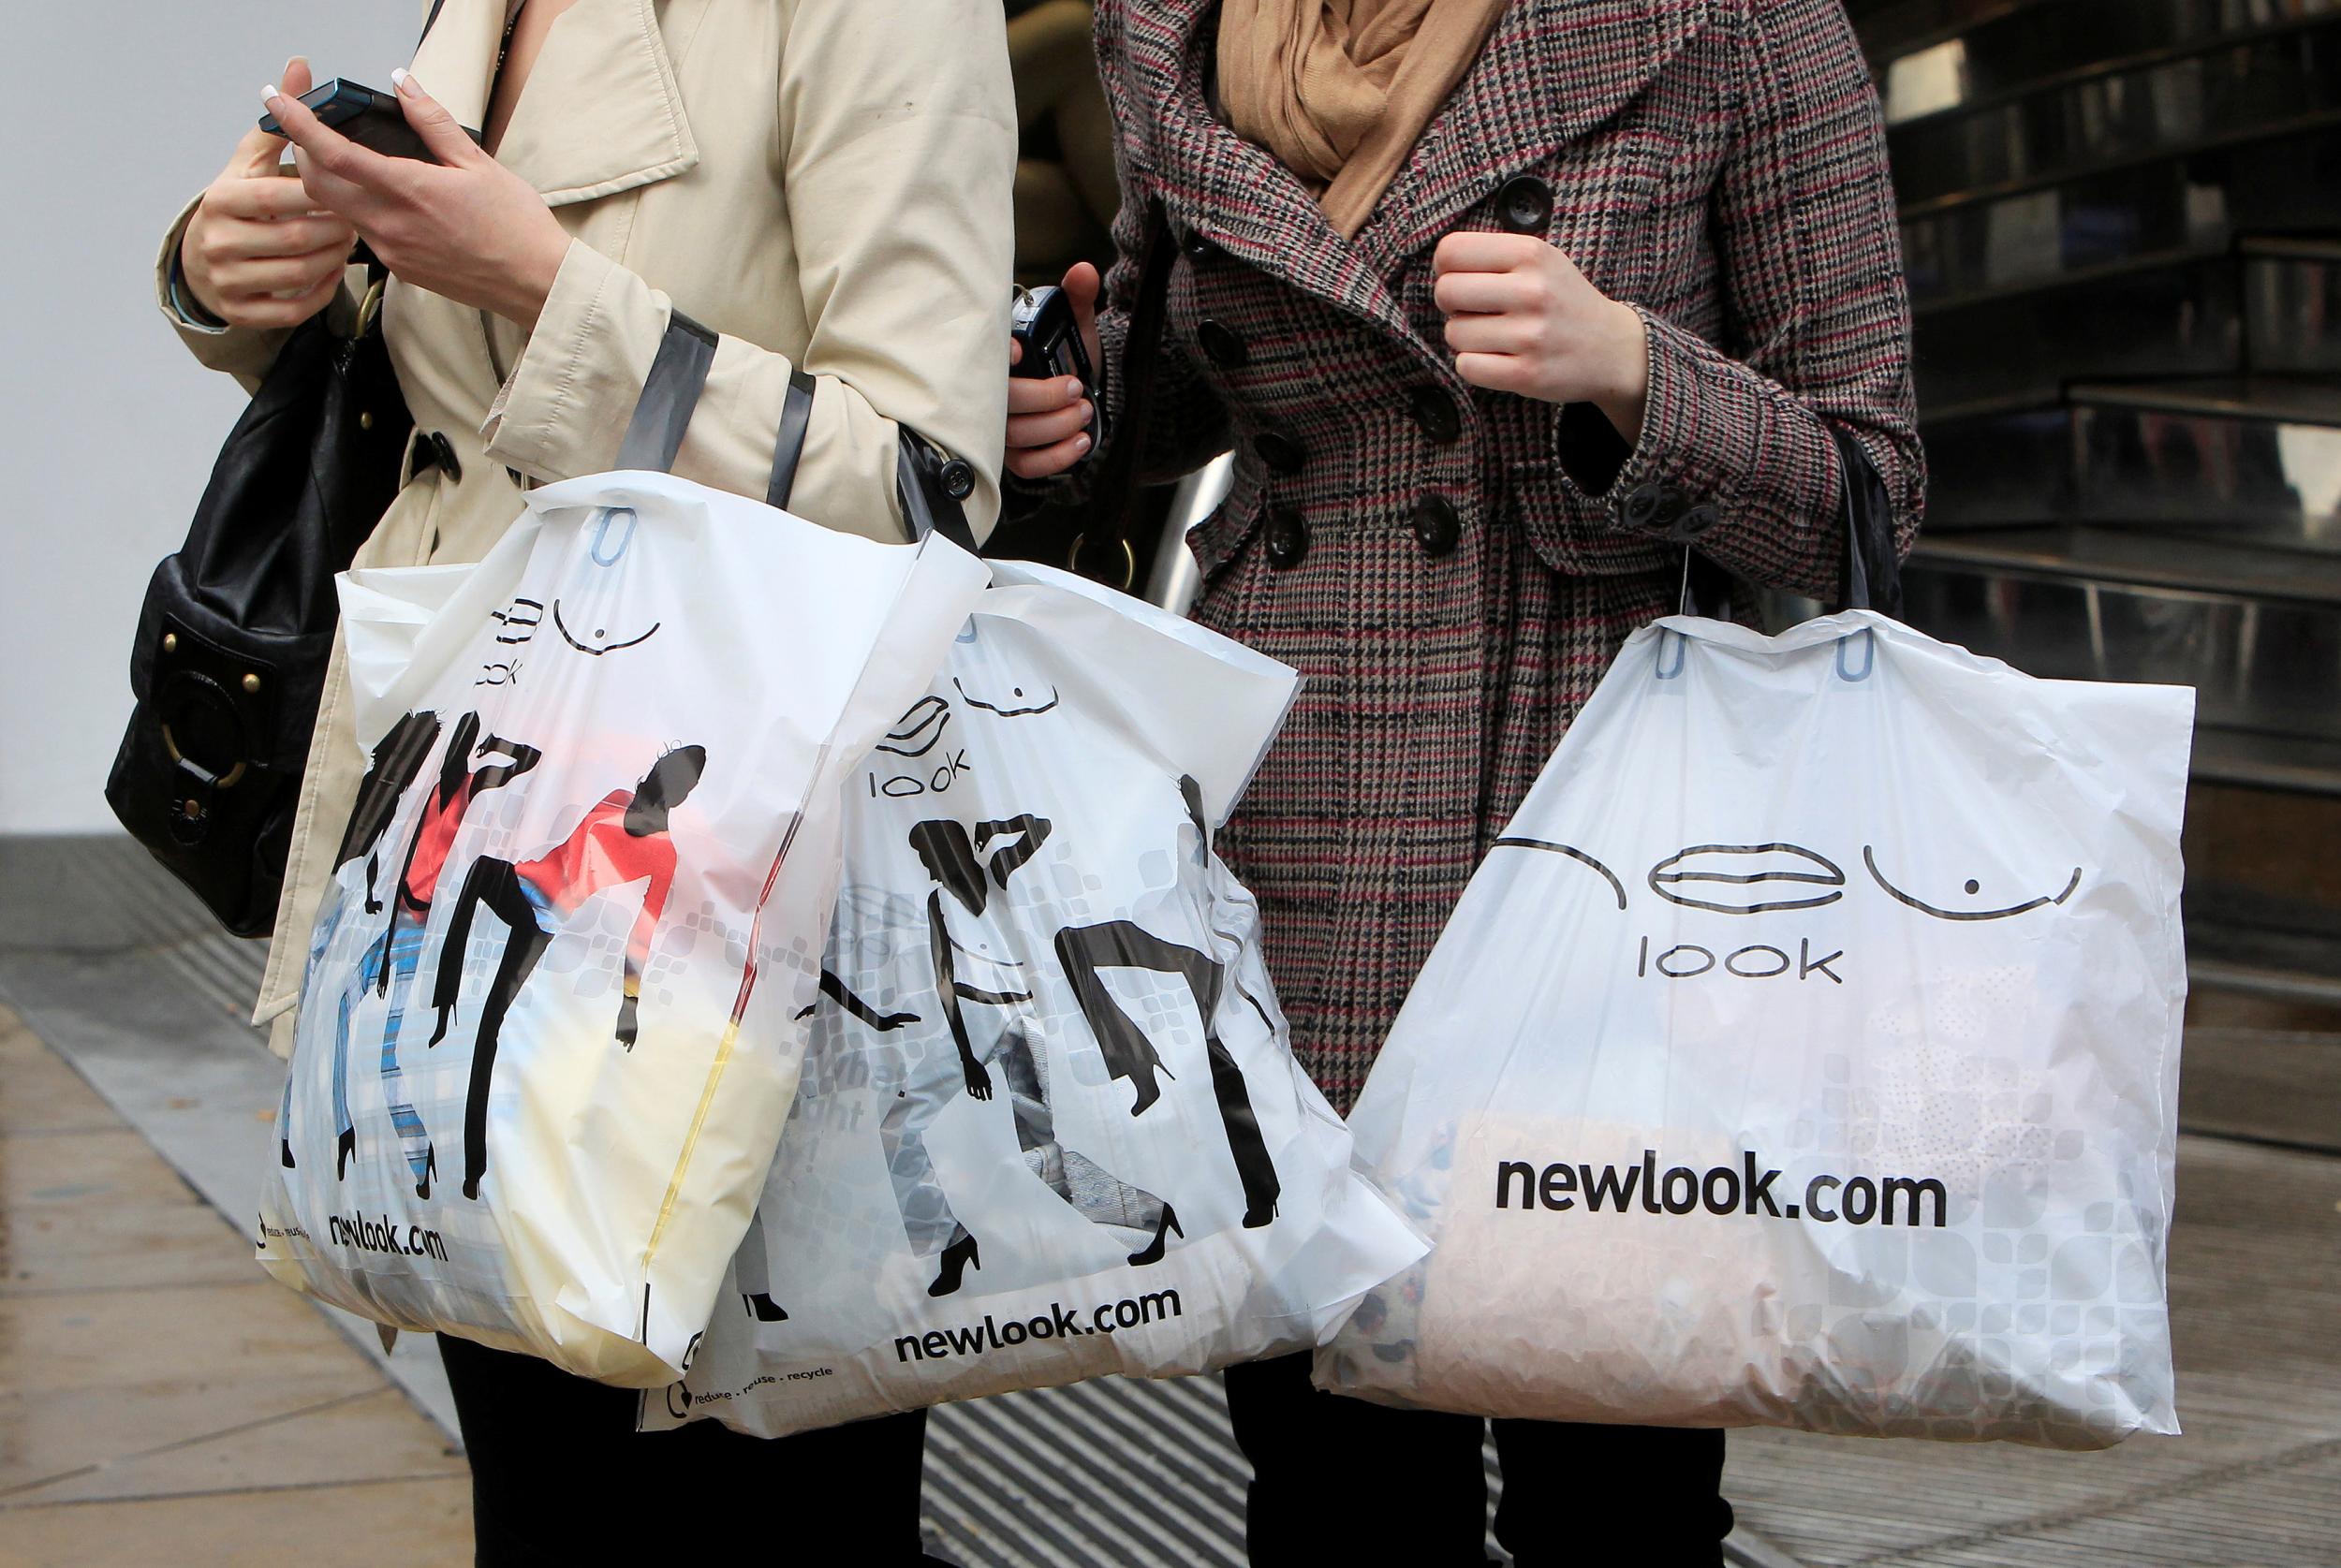 Majority of Britons are 'trend spenders', survey finds | The ...